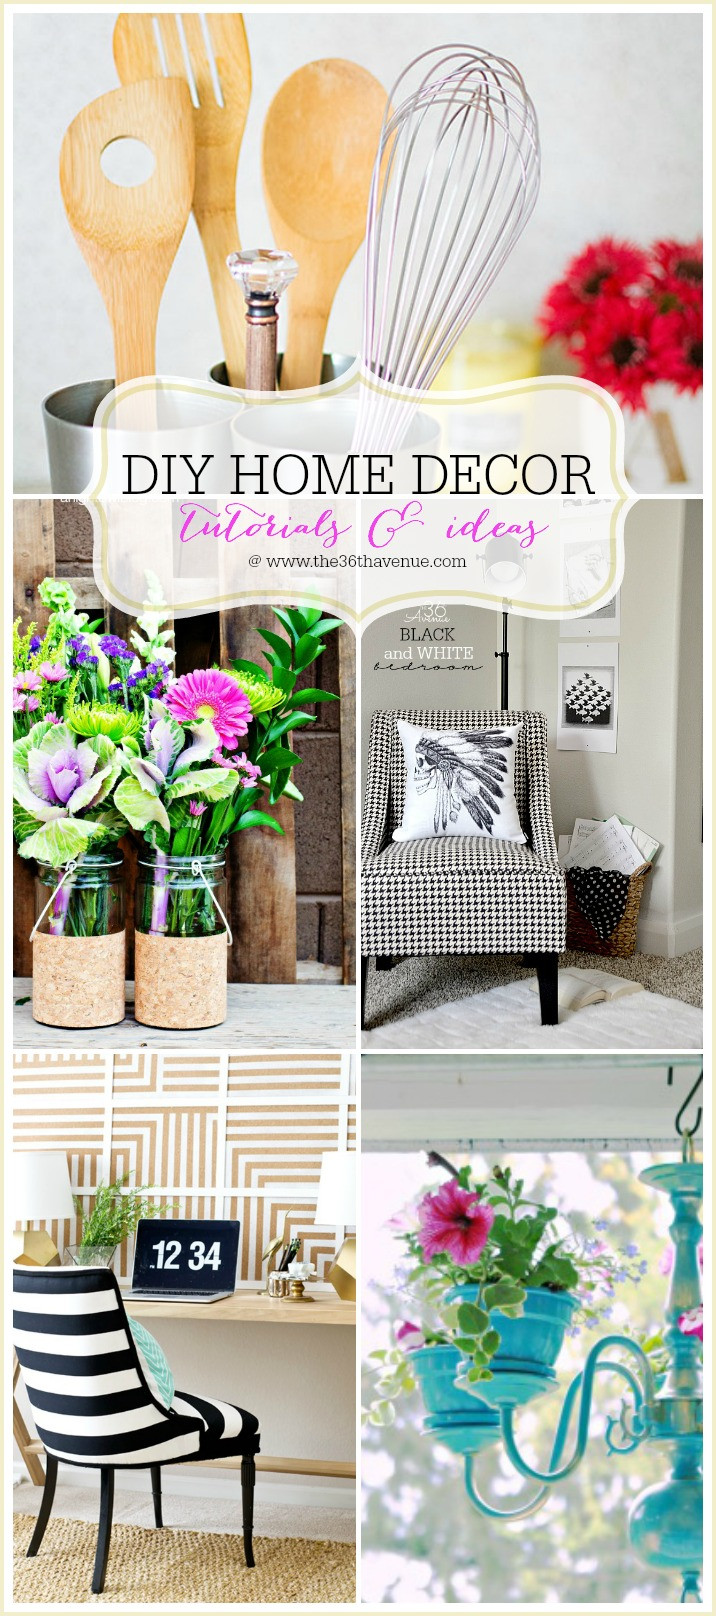 Home Diy
 Home Decor DIY Projects The 36th AVENUE